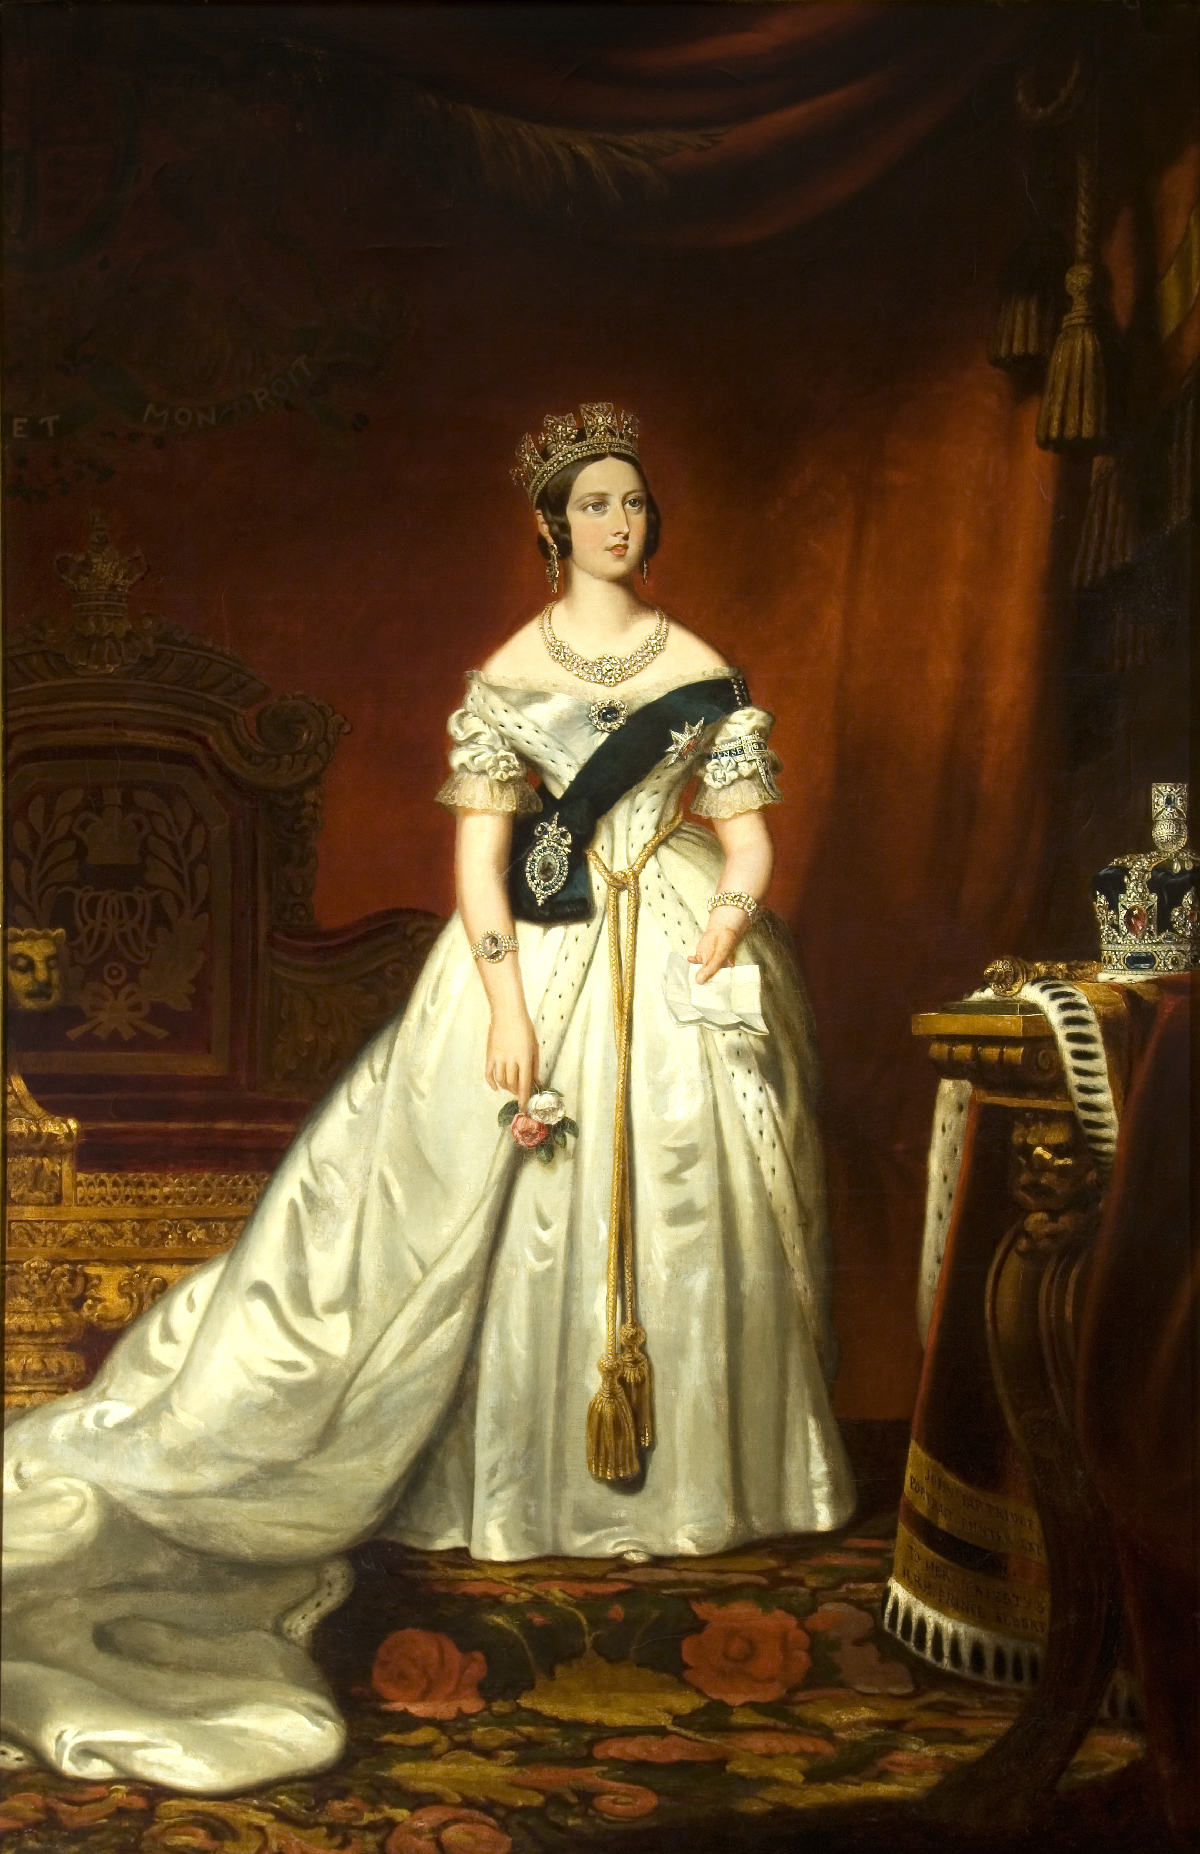 This full-length state portrait of Queen Victoria, executed in 1842 by British artist John Partridge, hangs in the foyer of the Senate Chamber in Parliament Hill’s Centre Block. It was rescued from four fires, including the 1916 inferno that destroyed the original Centre Block.